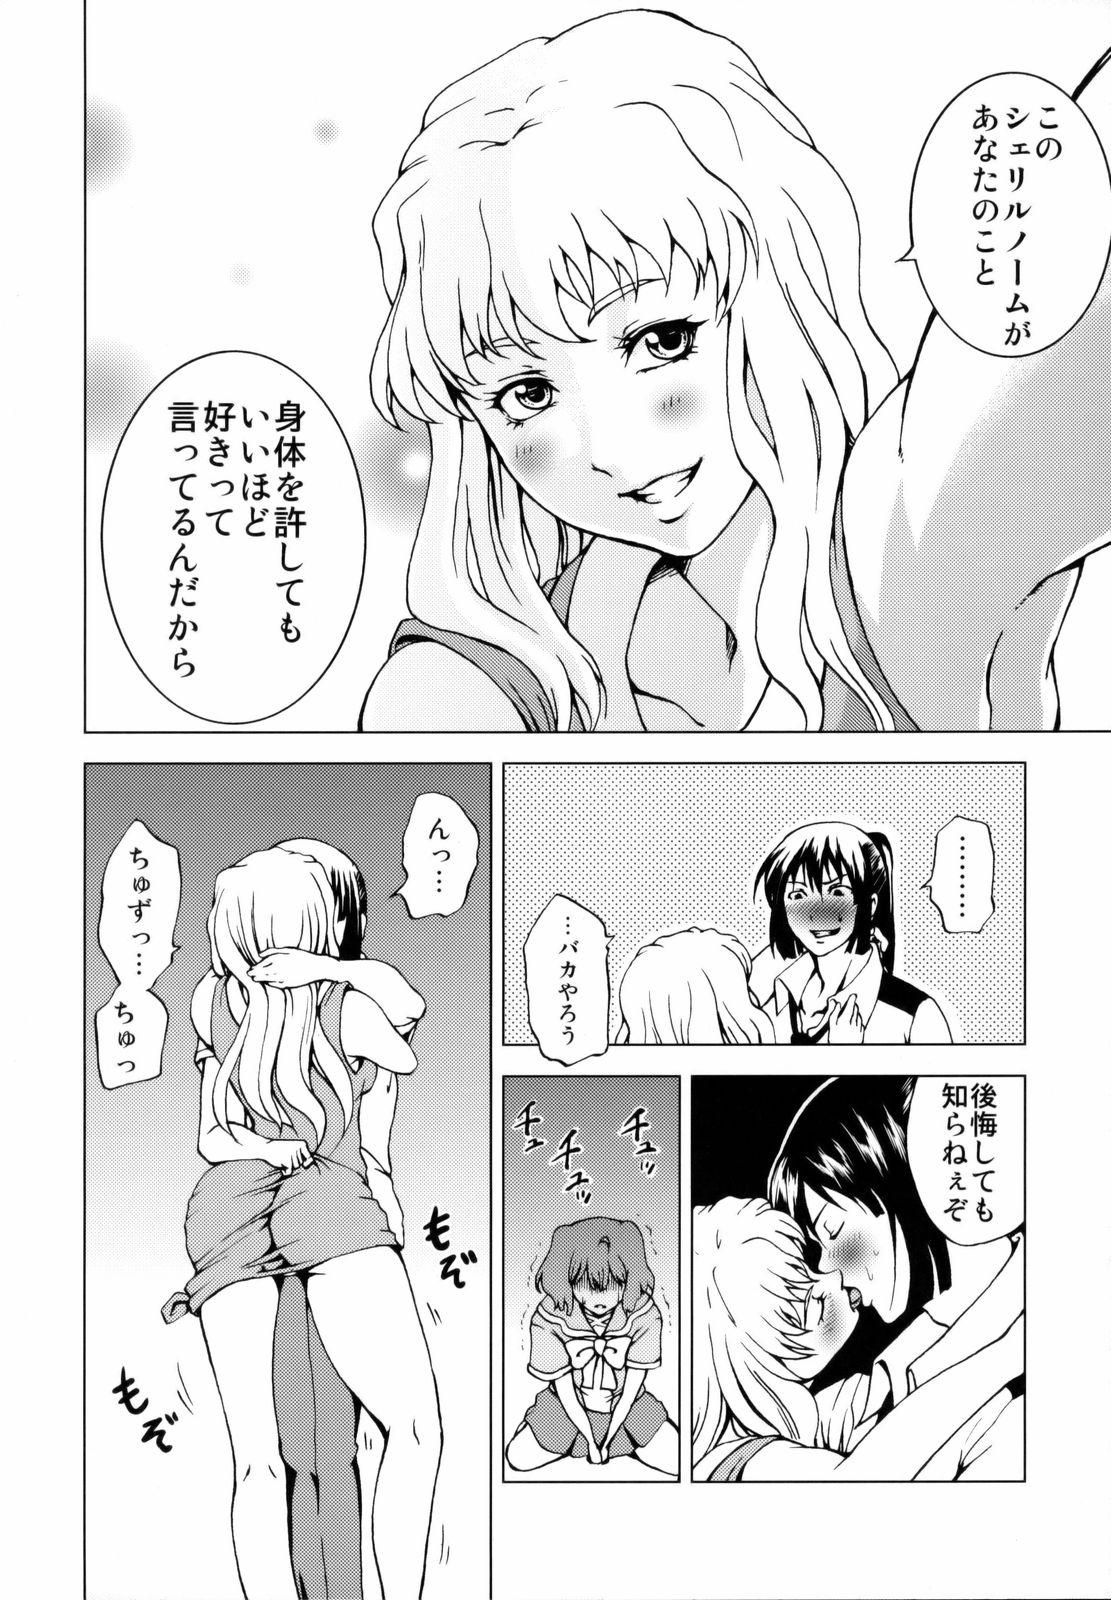 Old And Young First Lady - Macross frontier Her - Page 9